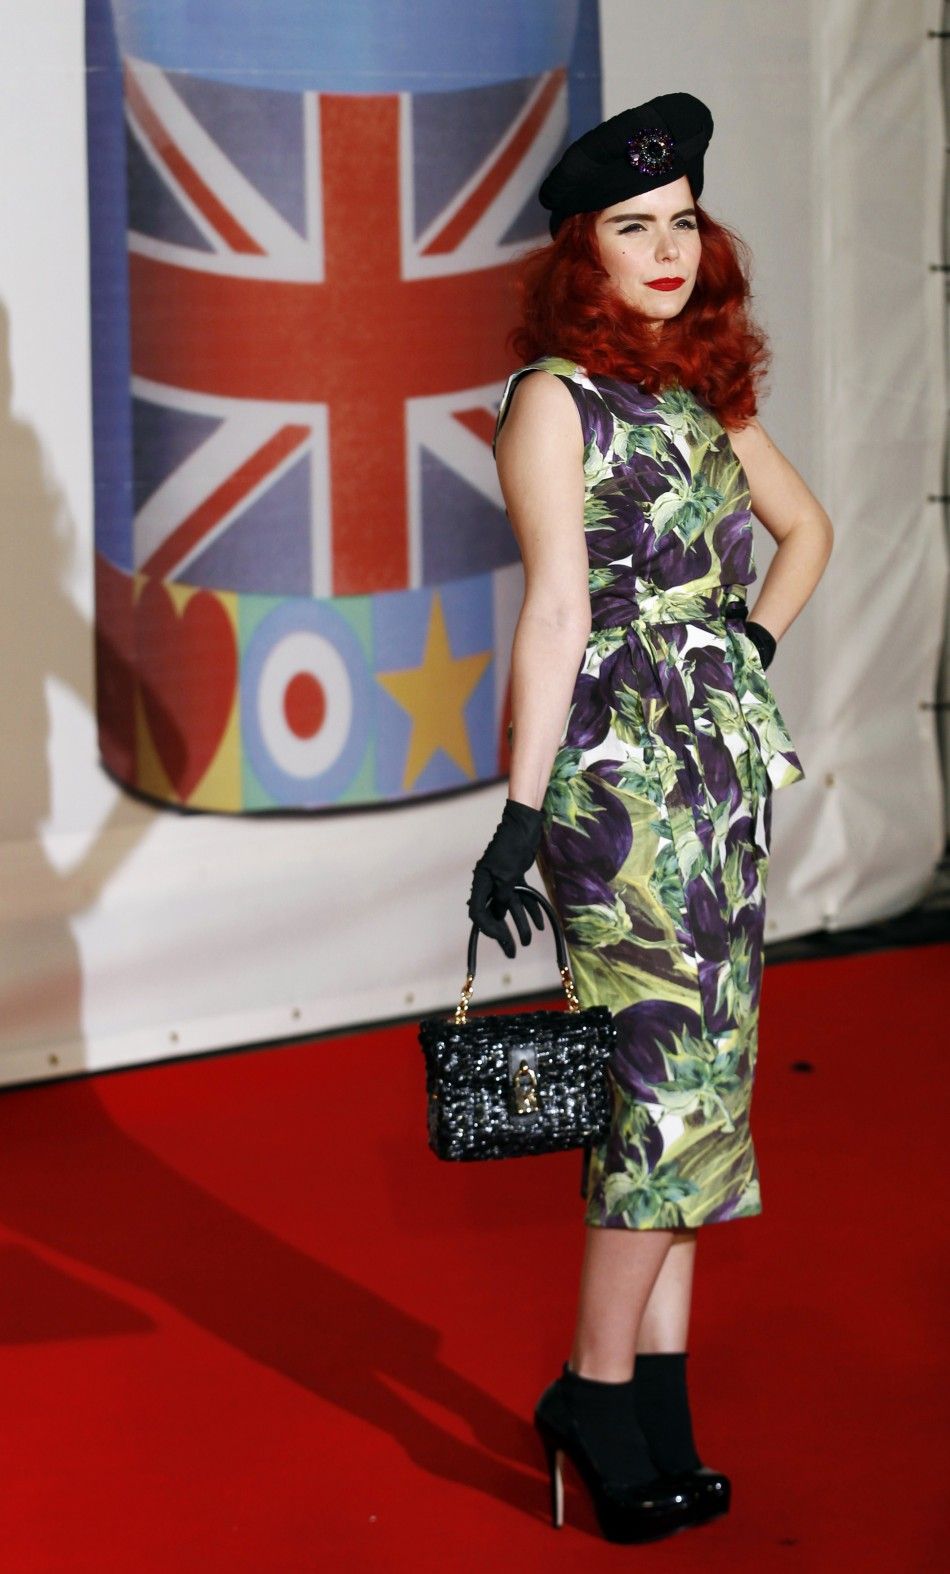 Paloma Faith arrives for the BRIT Music Awards at the O2 Arena in London February 21, 2012.